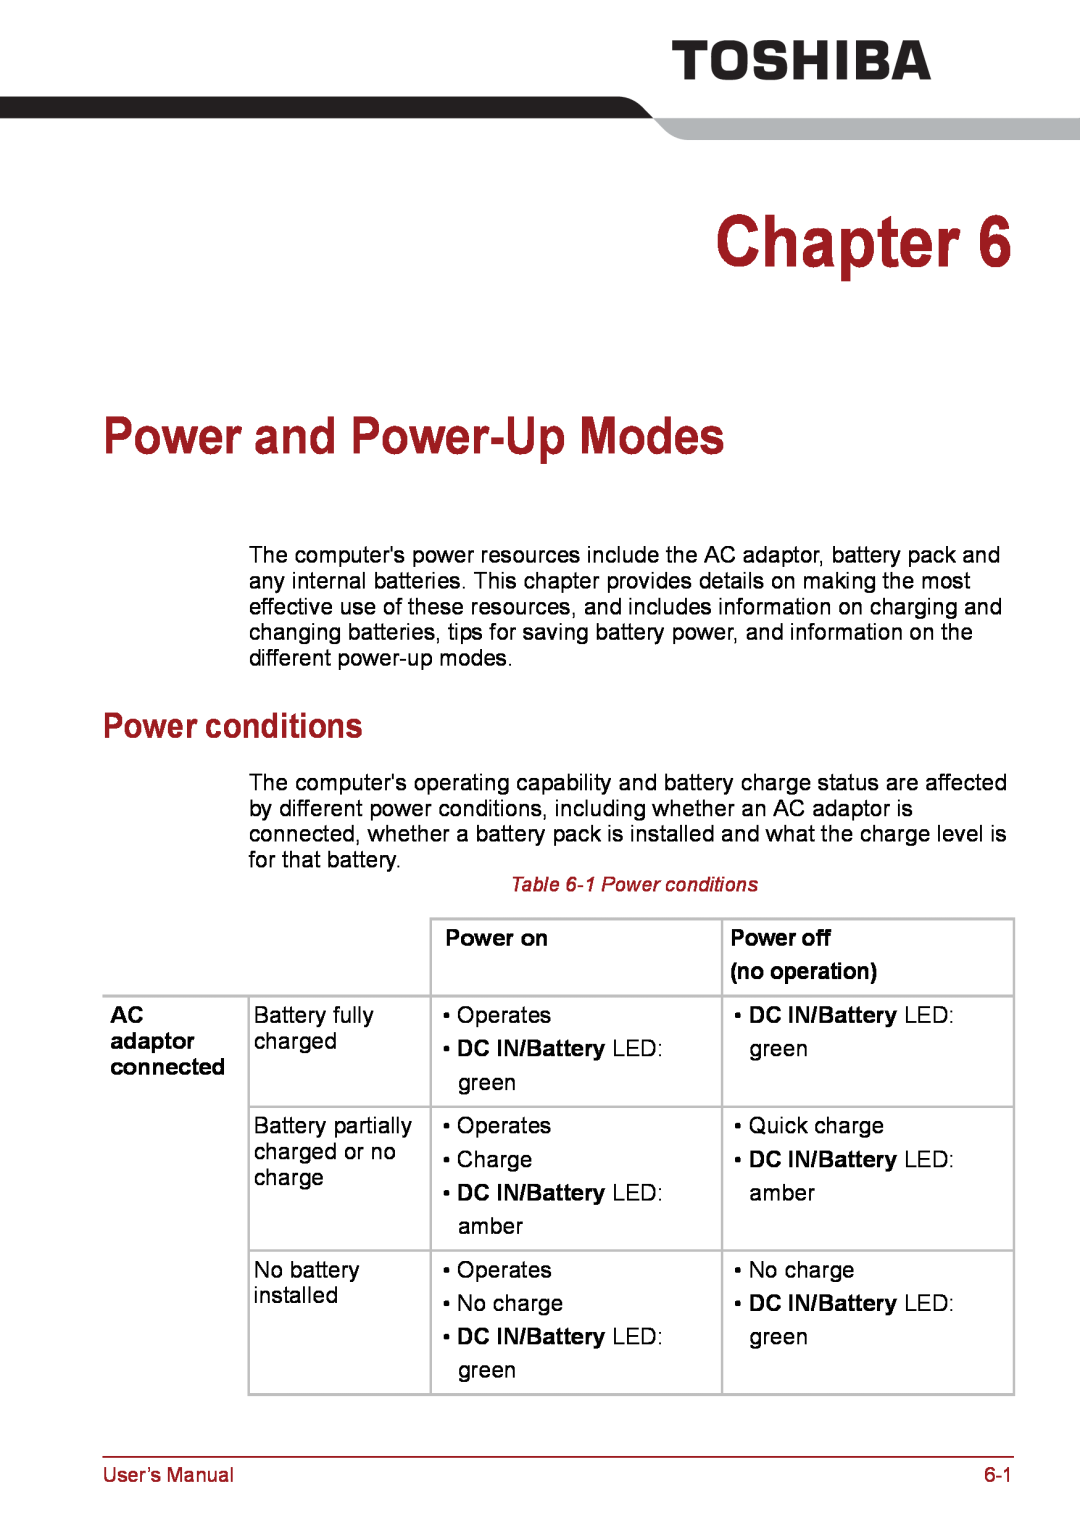 Toshiba PSC08U-02D01D Power and Power-Up Modes, Power conditions, Power on, no operation, DC IN/Battery LED, adaptor 